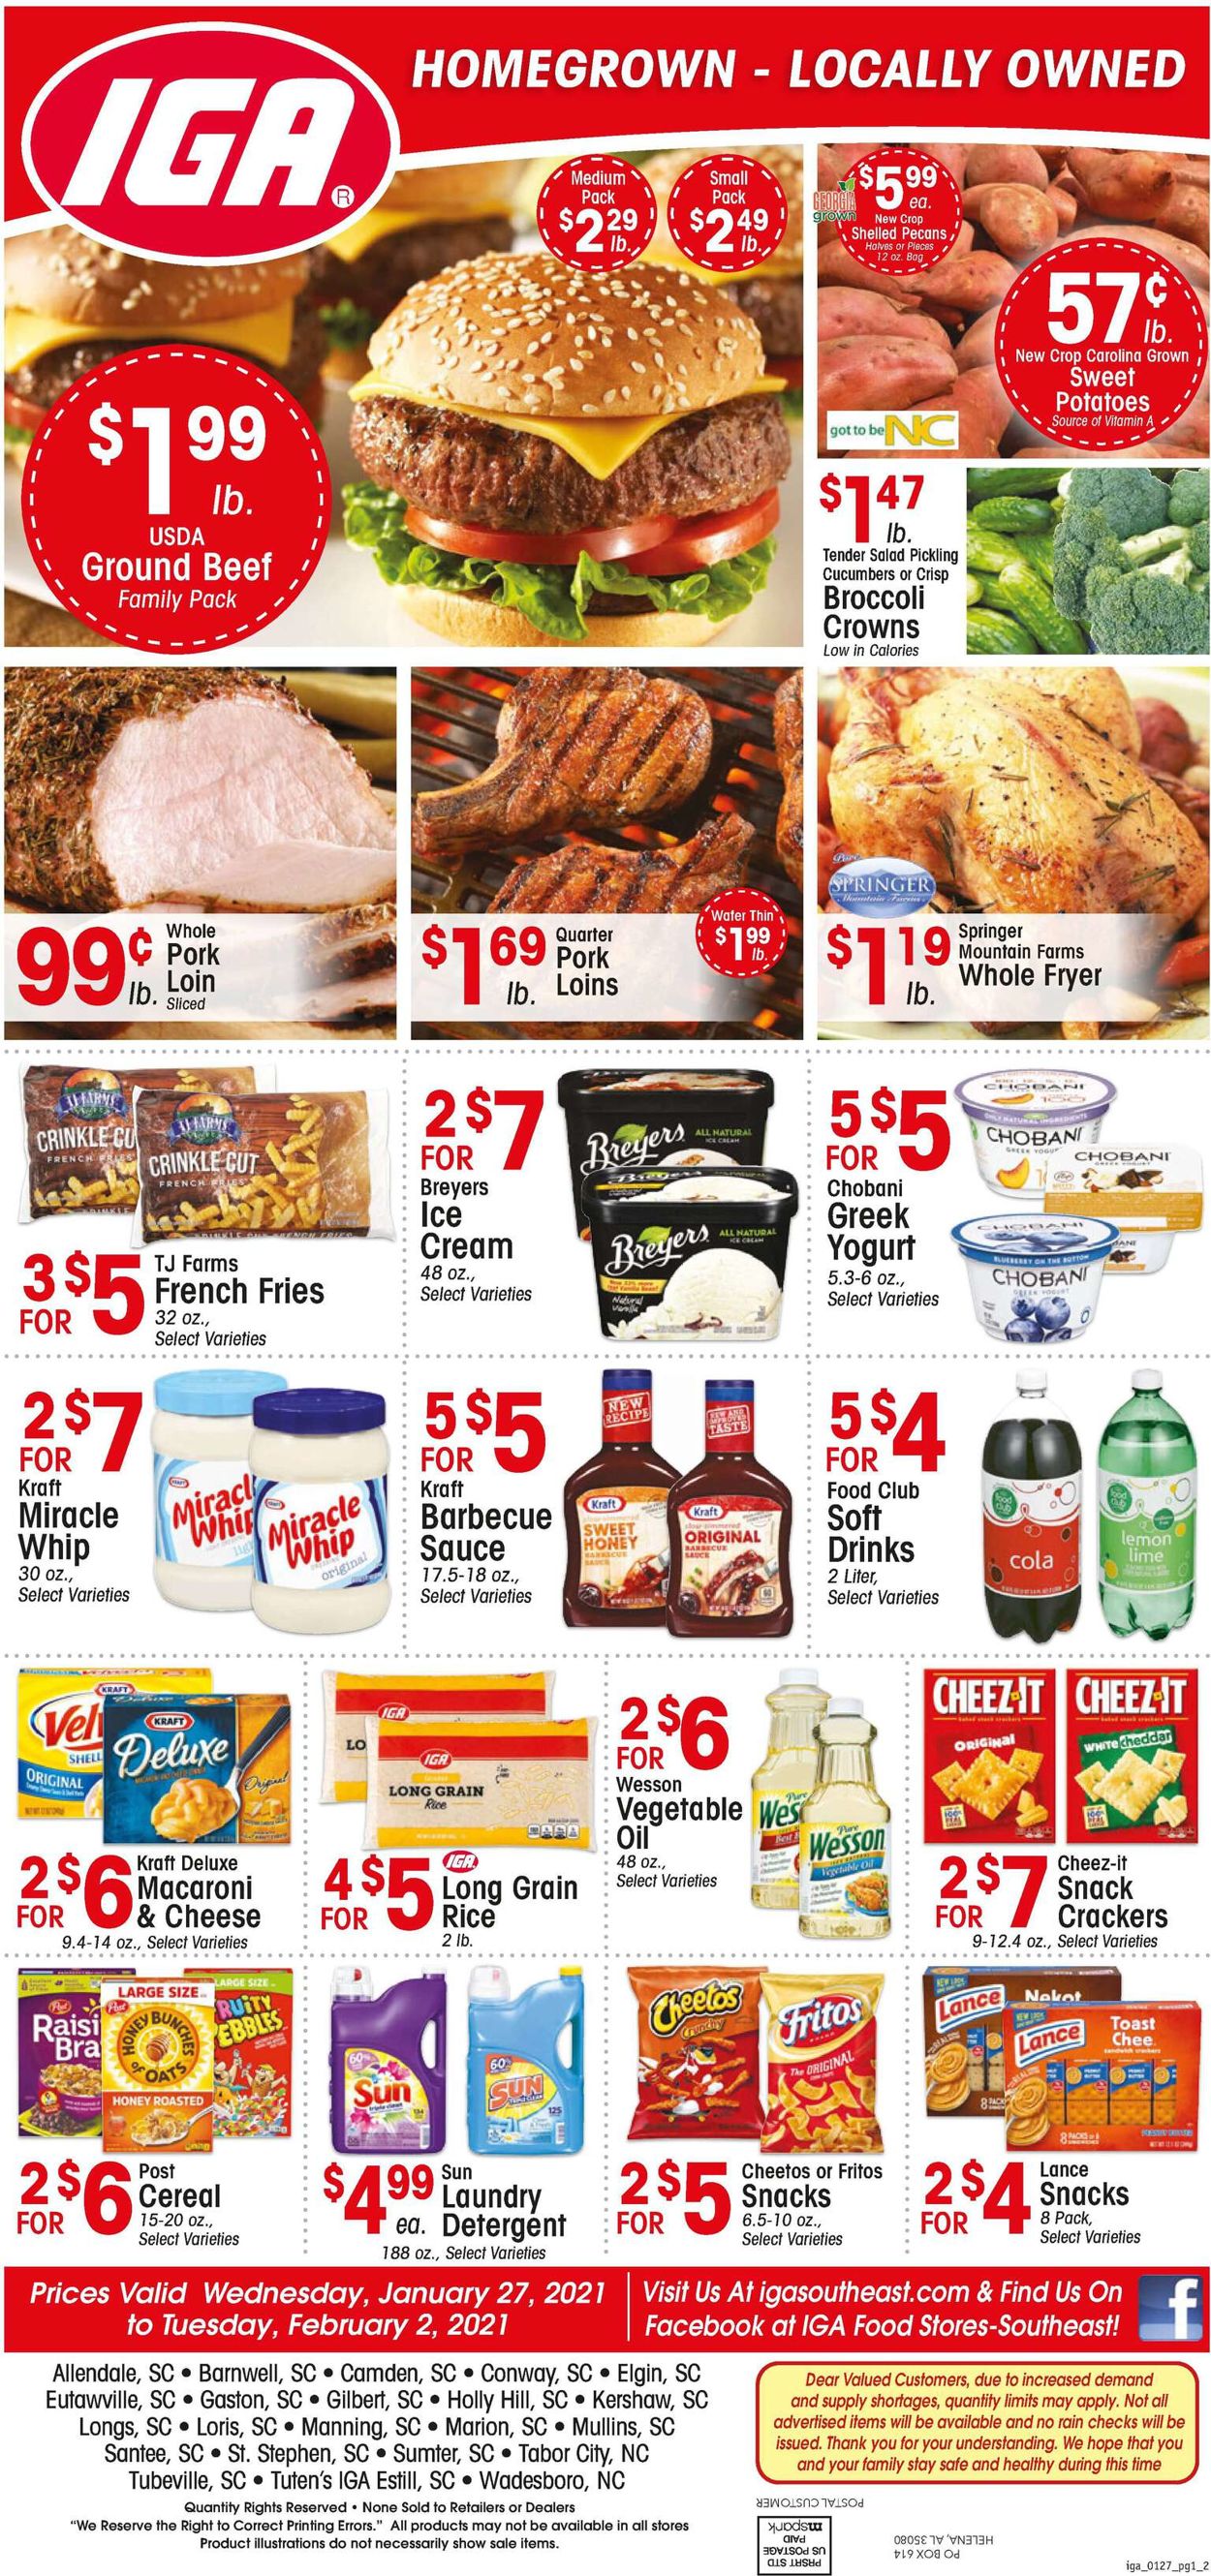 IGA Current weekly ad 01/27 - 02/02/2021 - frequent-ads.com